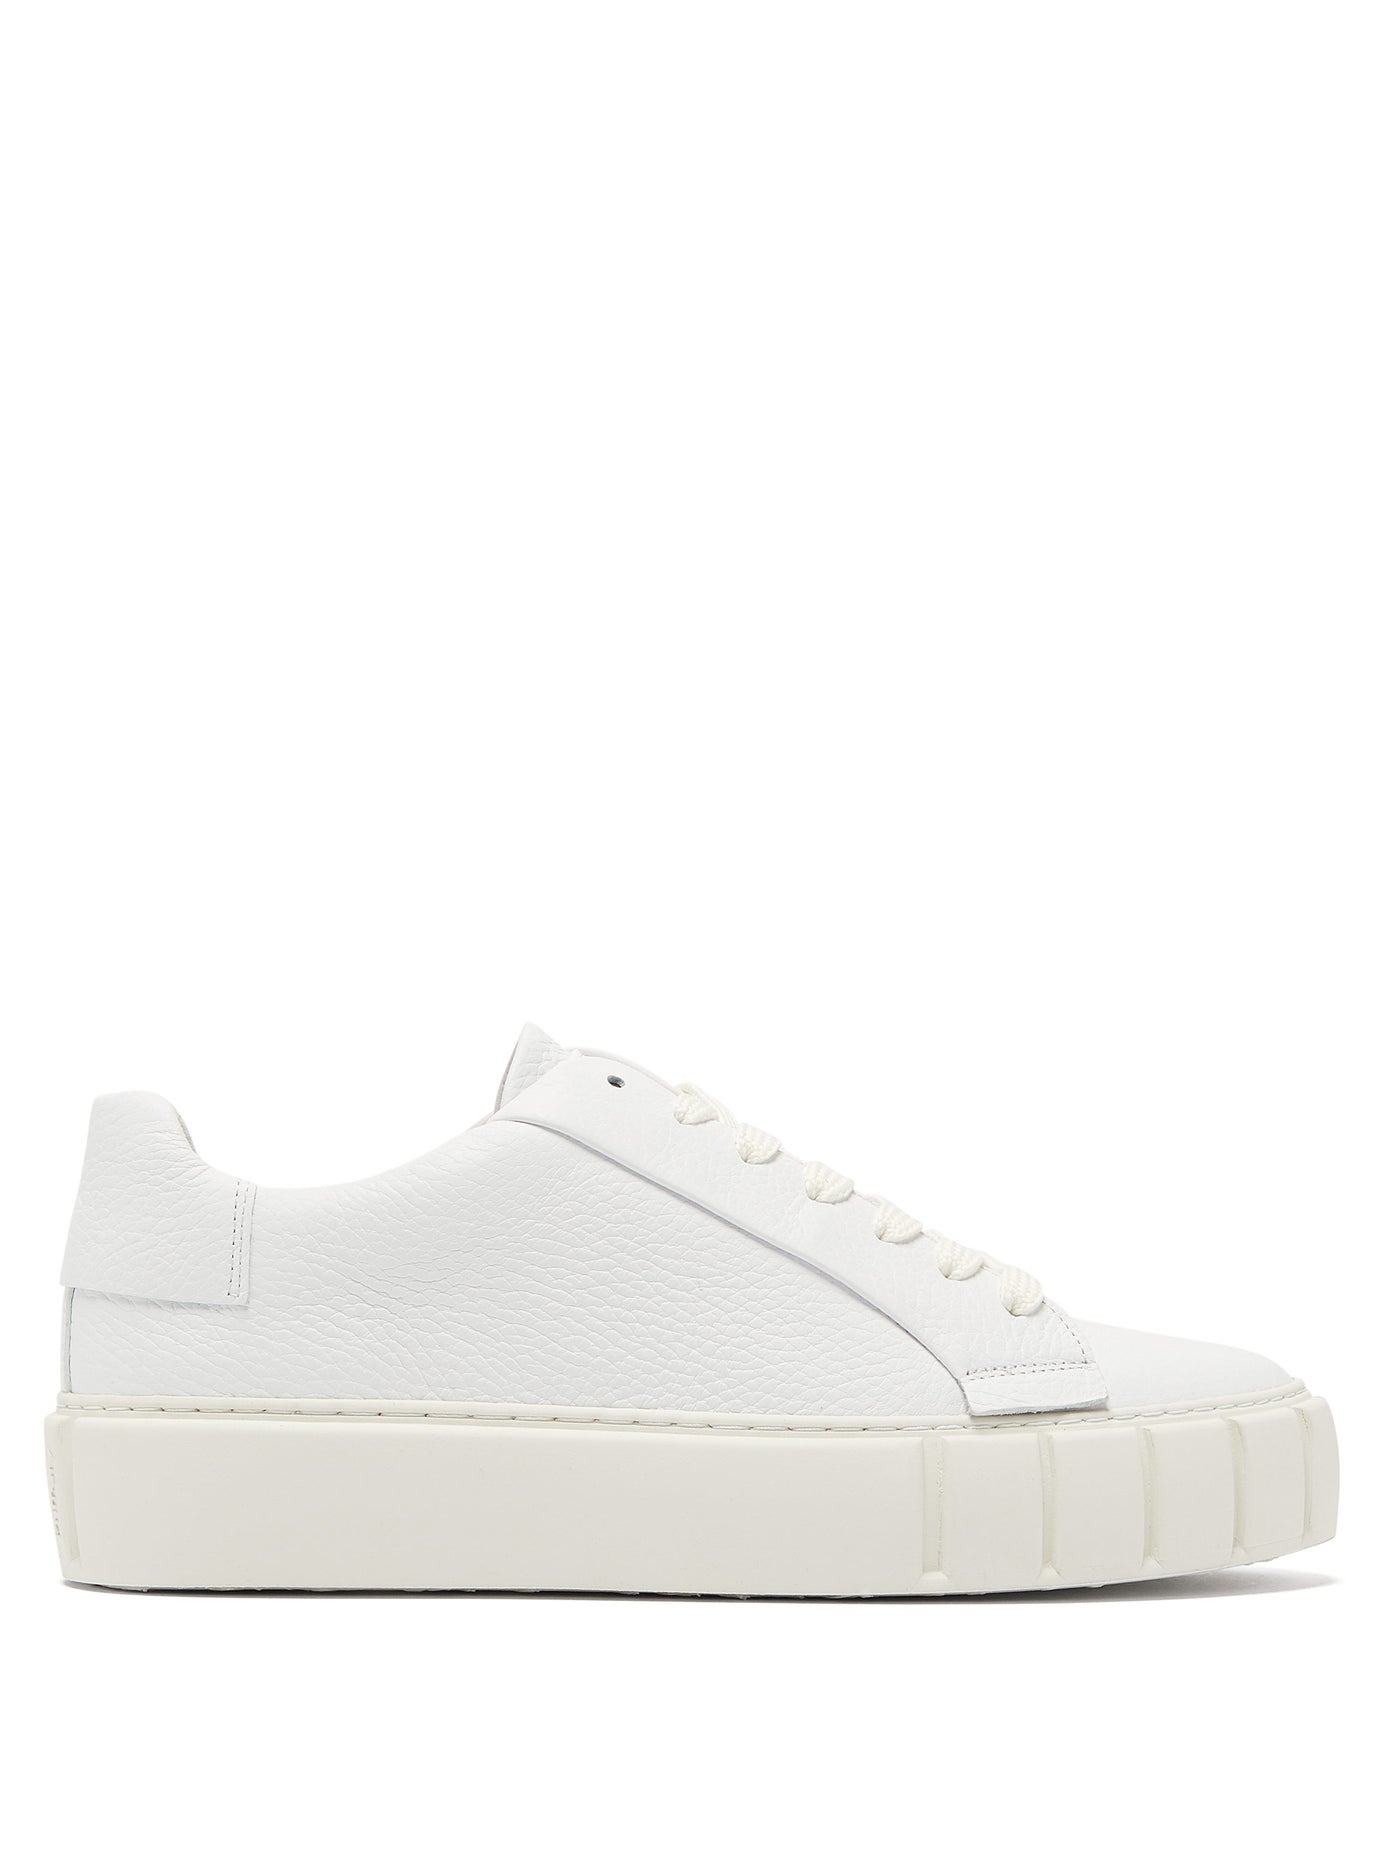 14 best white trainers and sneakers to 